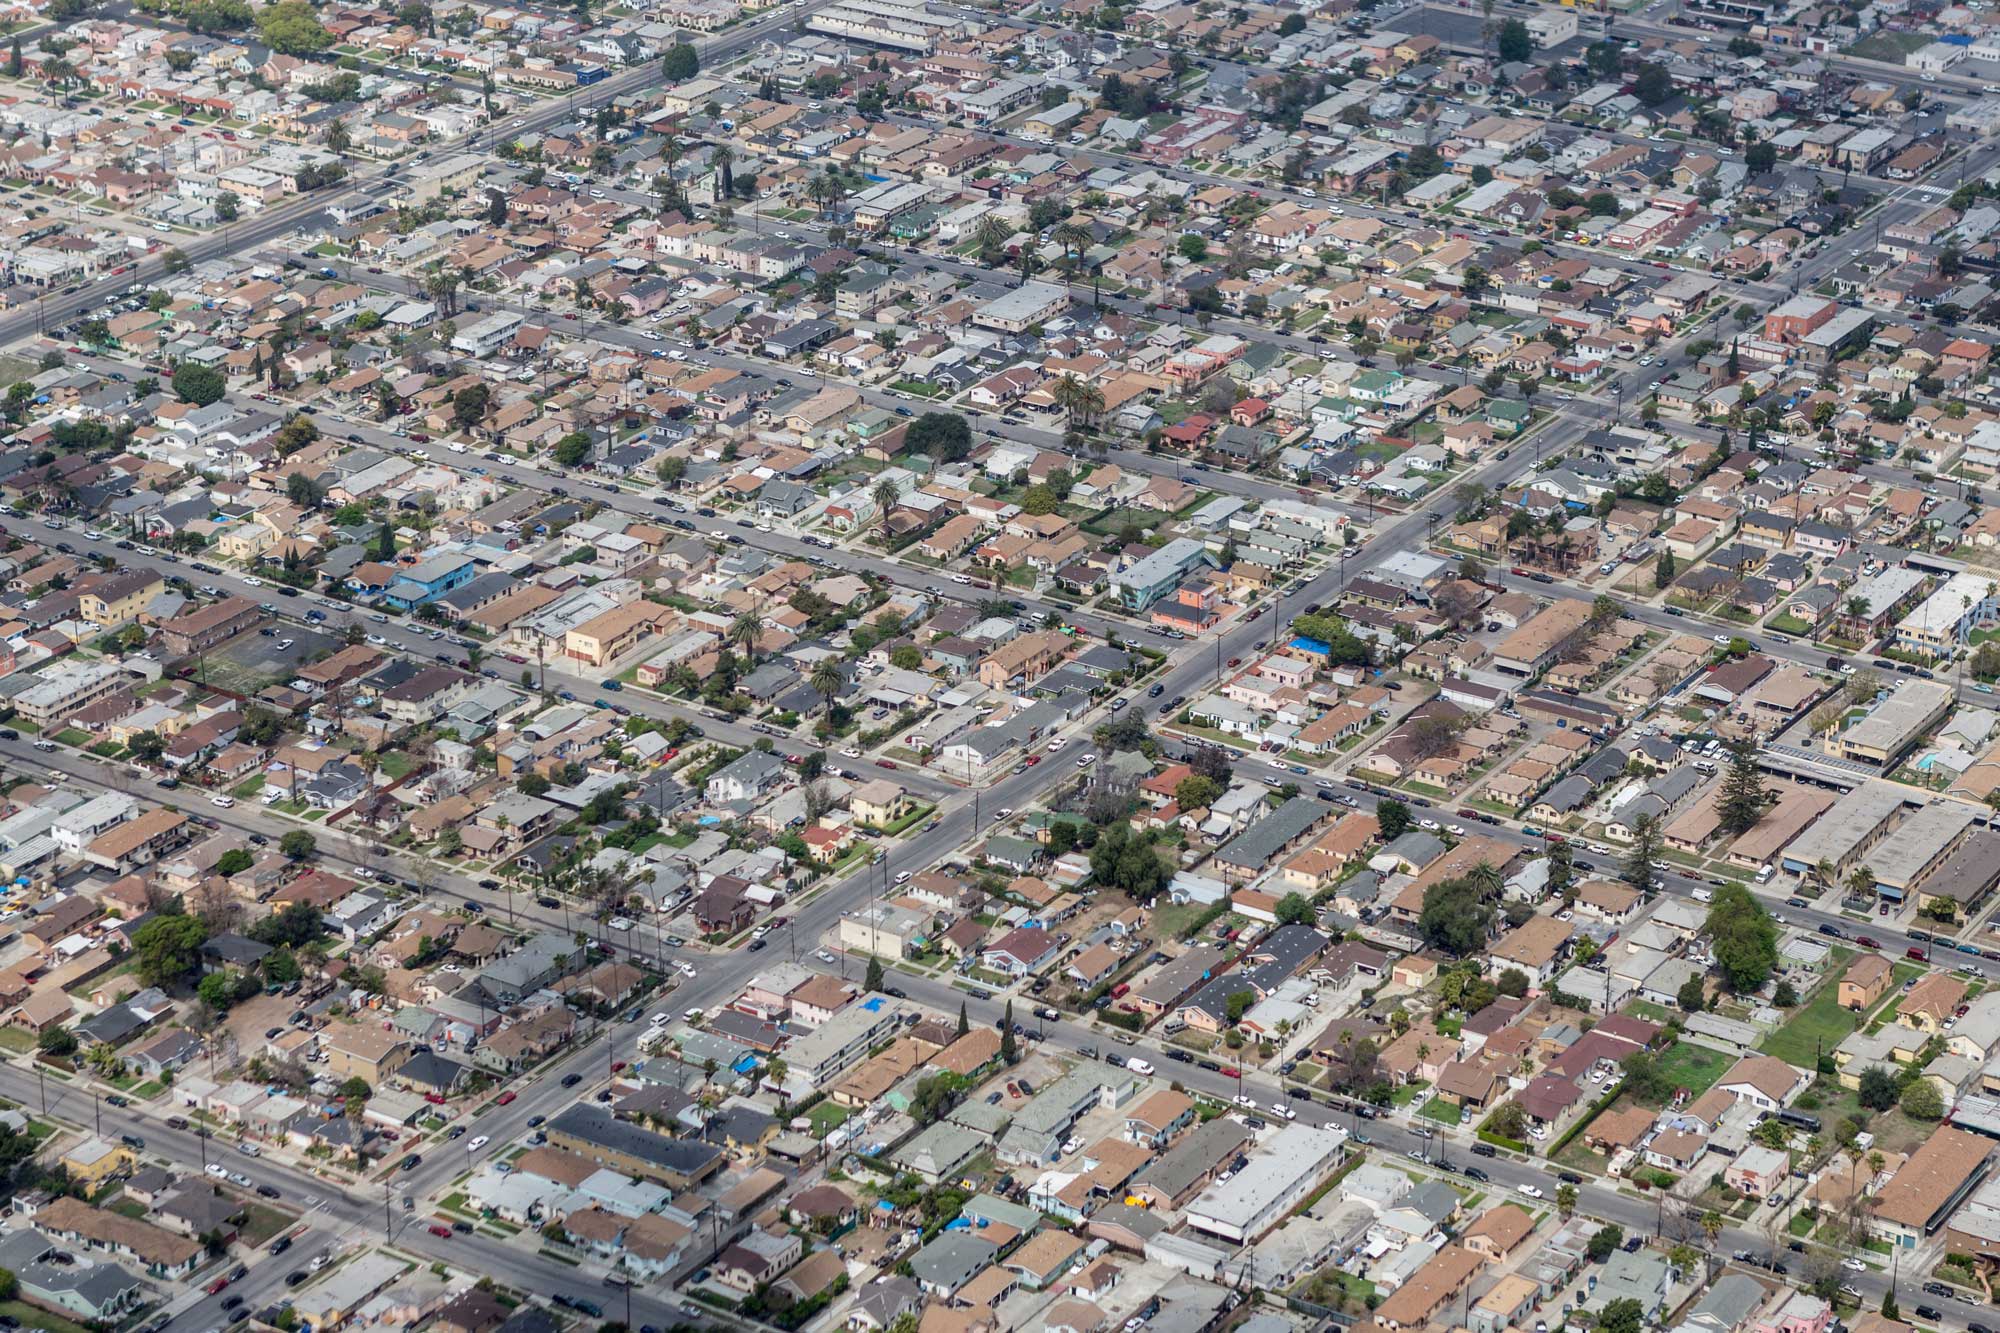 photo - Aerial View of South Central Los Angeles